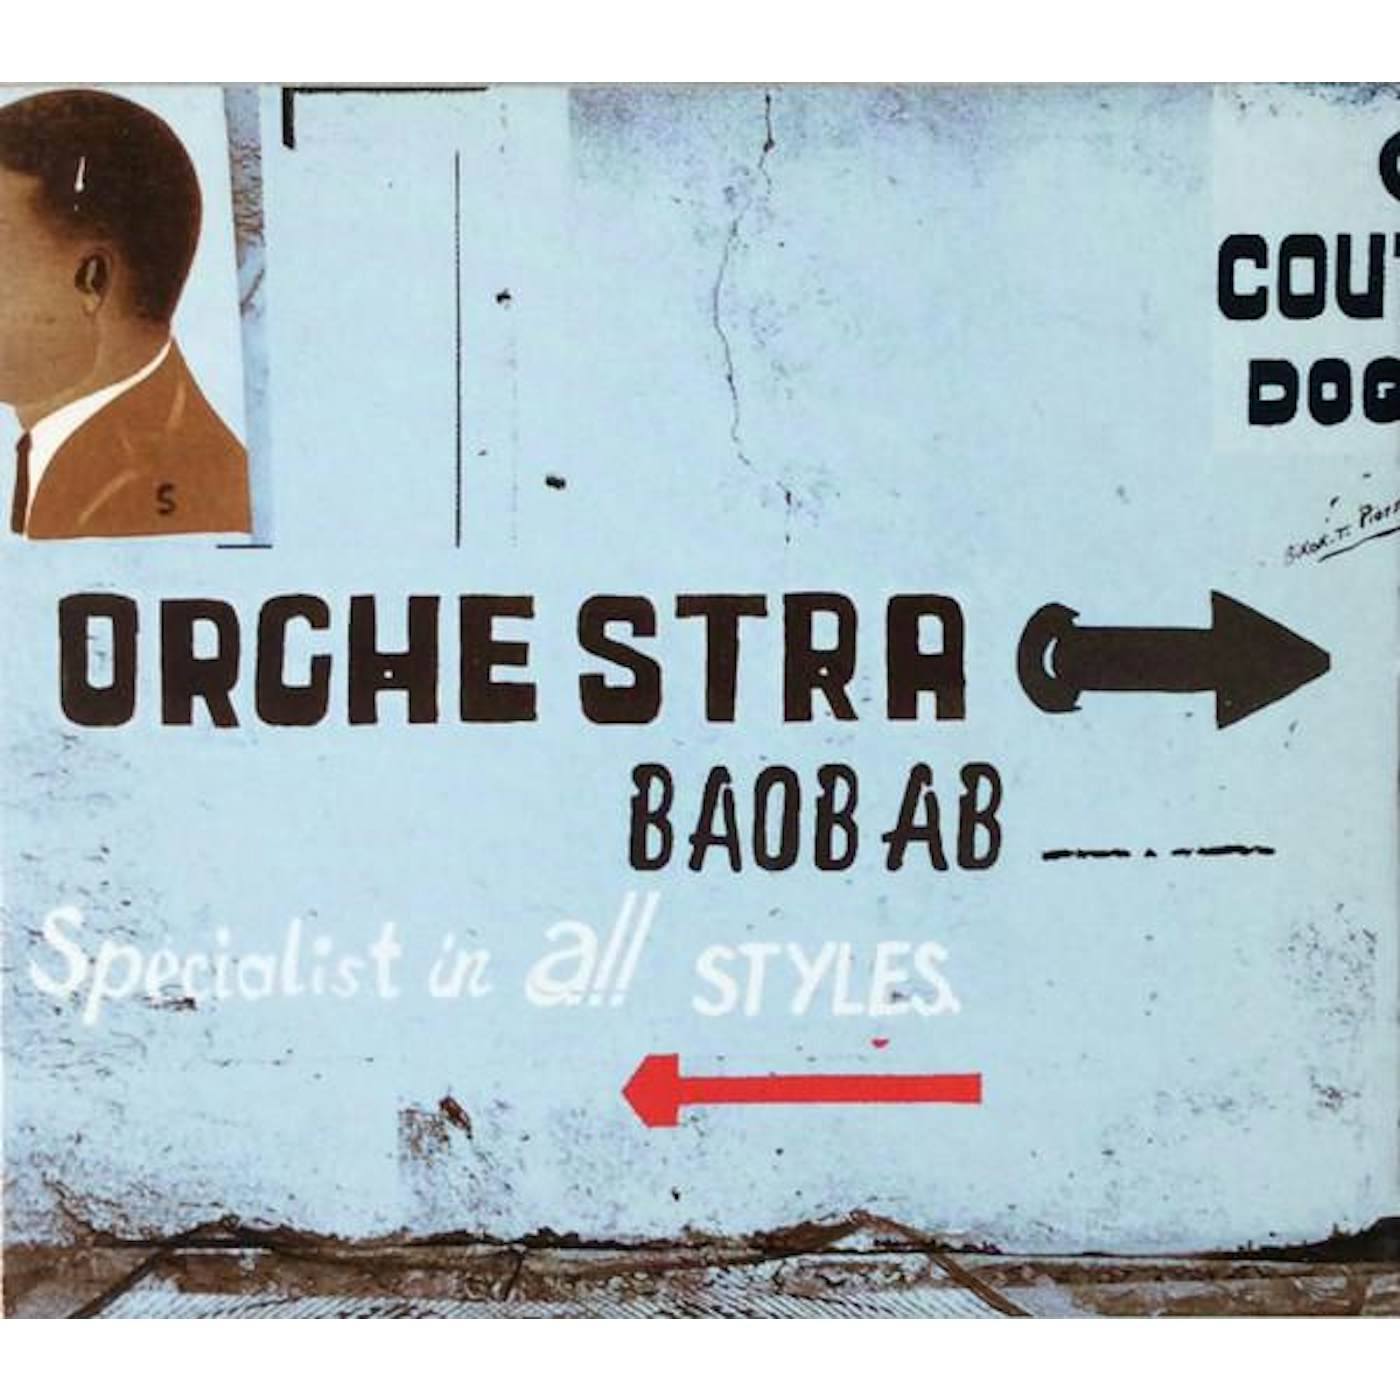 Orchestra Baobab SPECIALISTS IN ALL STYLES CD